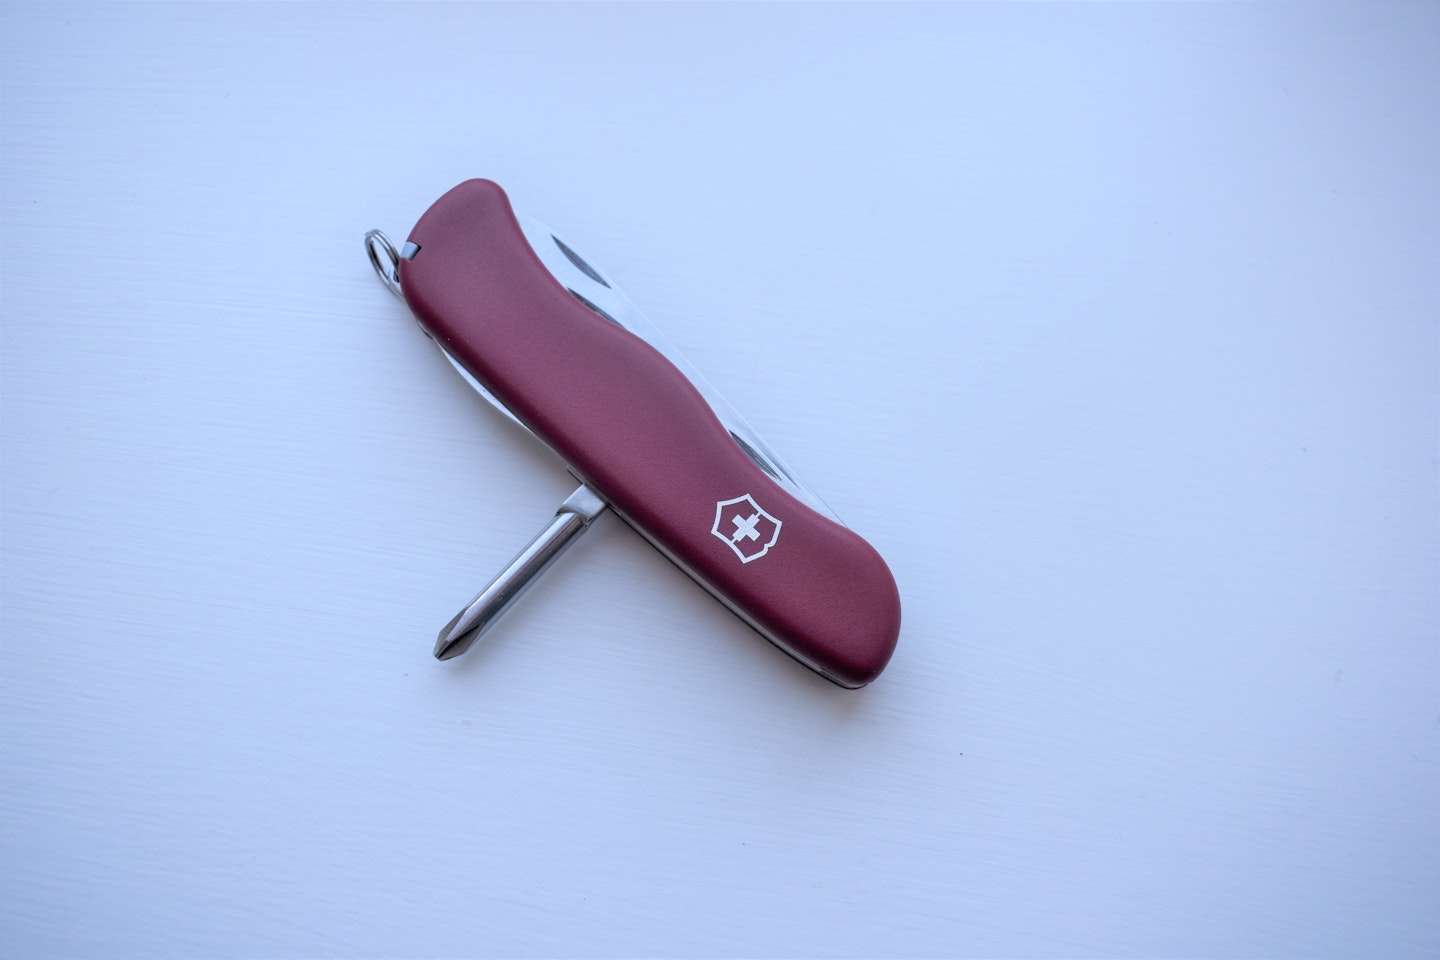 The Victorinox Adventurer pocket knife with Phillips screwdriver function